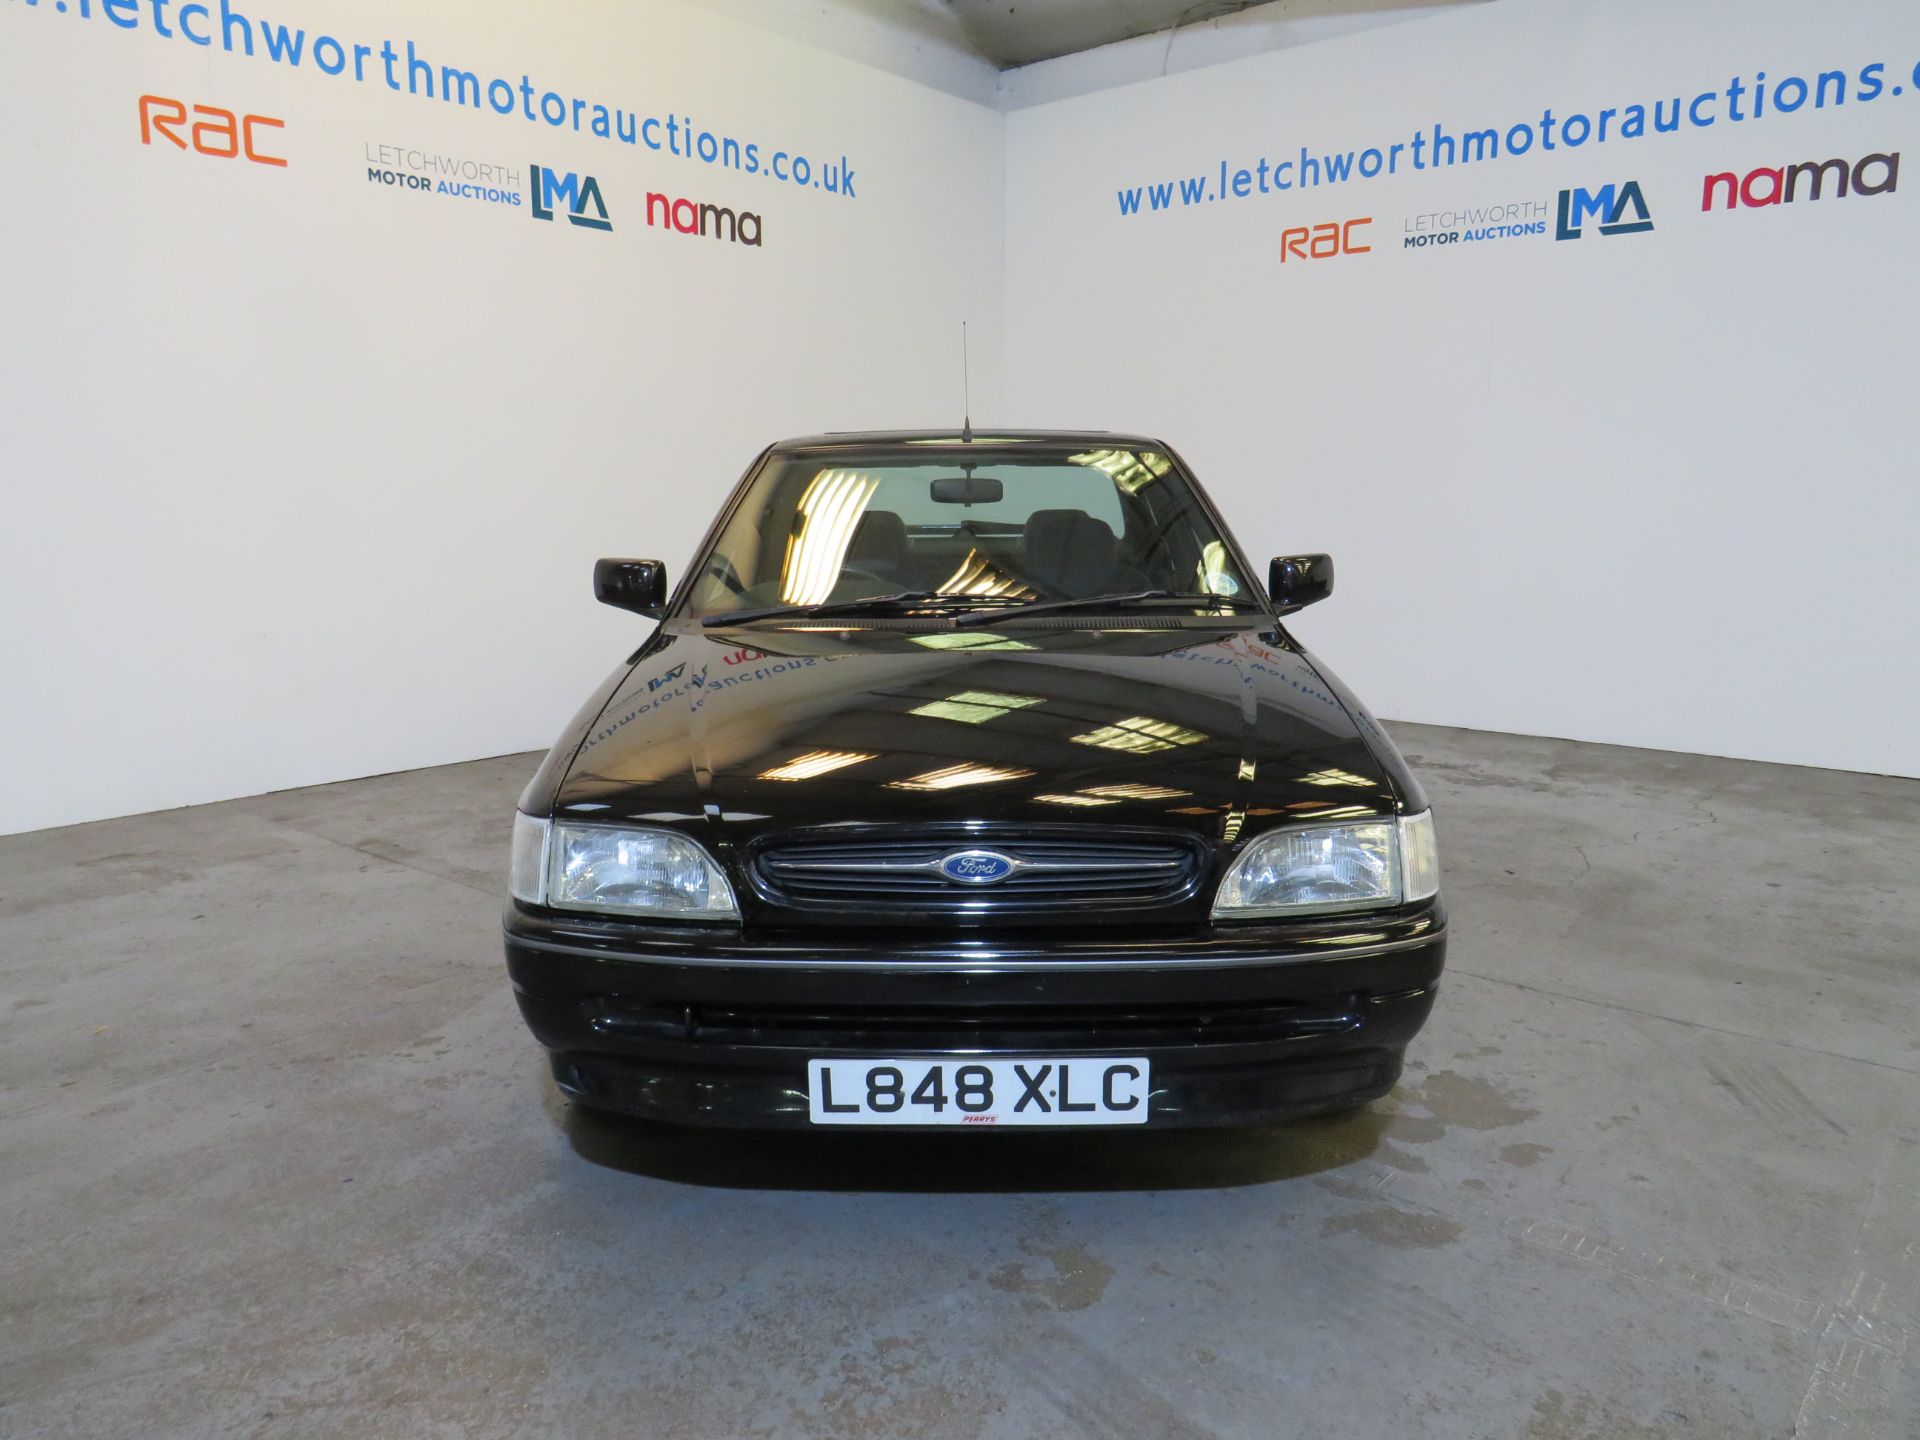 1994 Ford Orion Ghia SI - 1796cc - Image 2 of 10